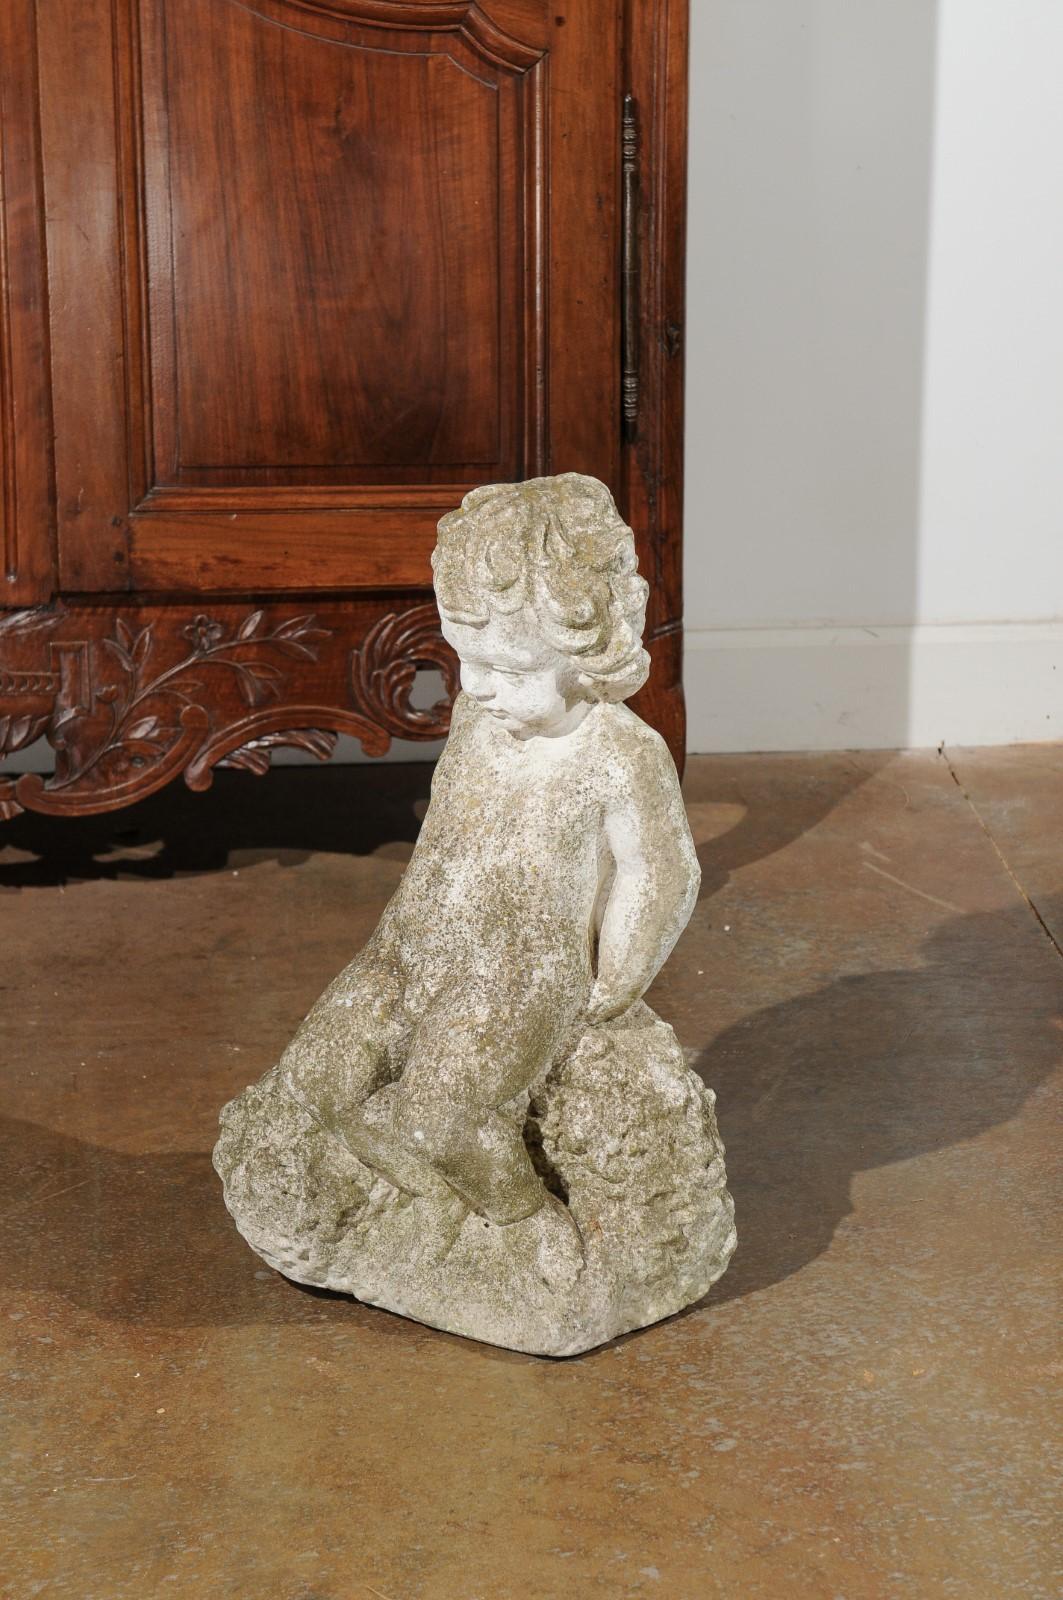 Swedish Carved Stone Garden Sculpture of a Putto Sitting on a Rock, 20th Century For Sale 3